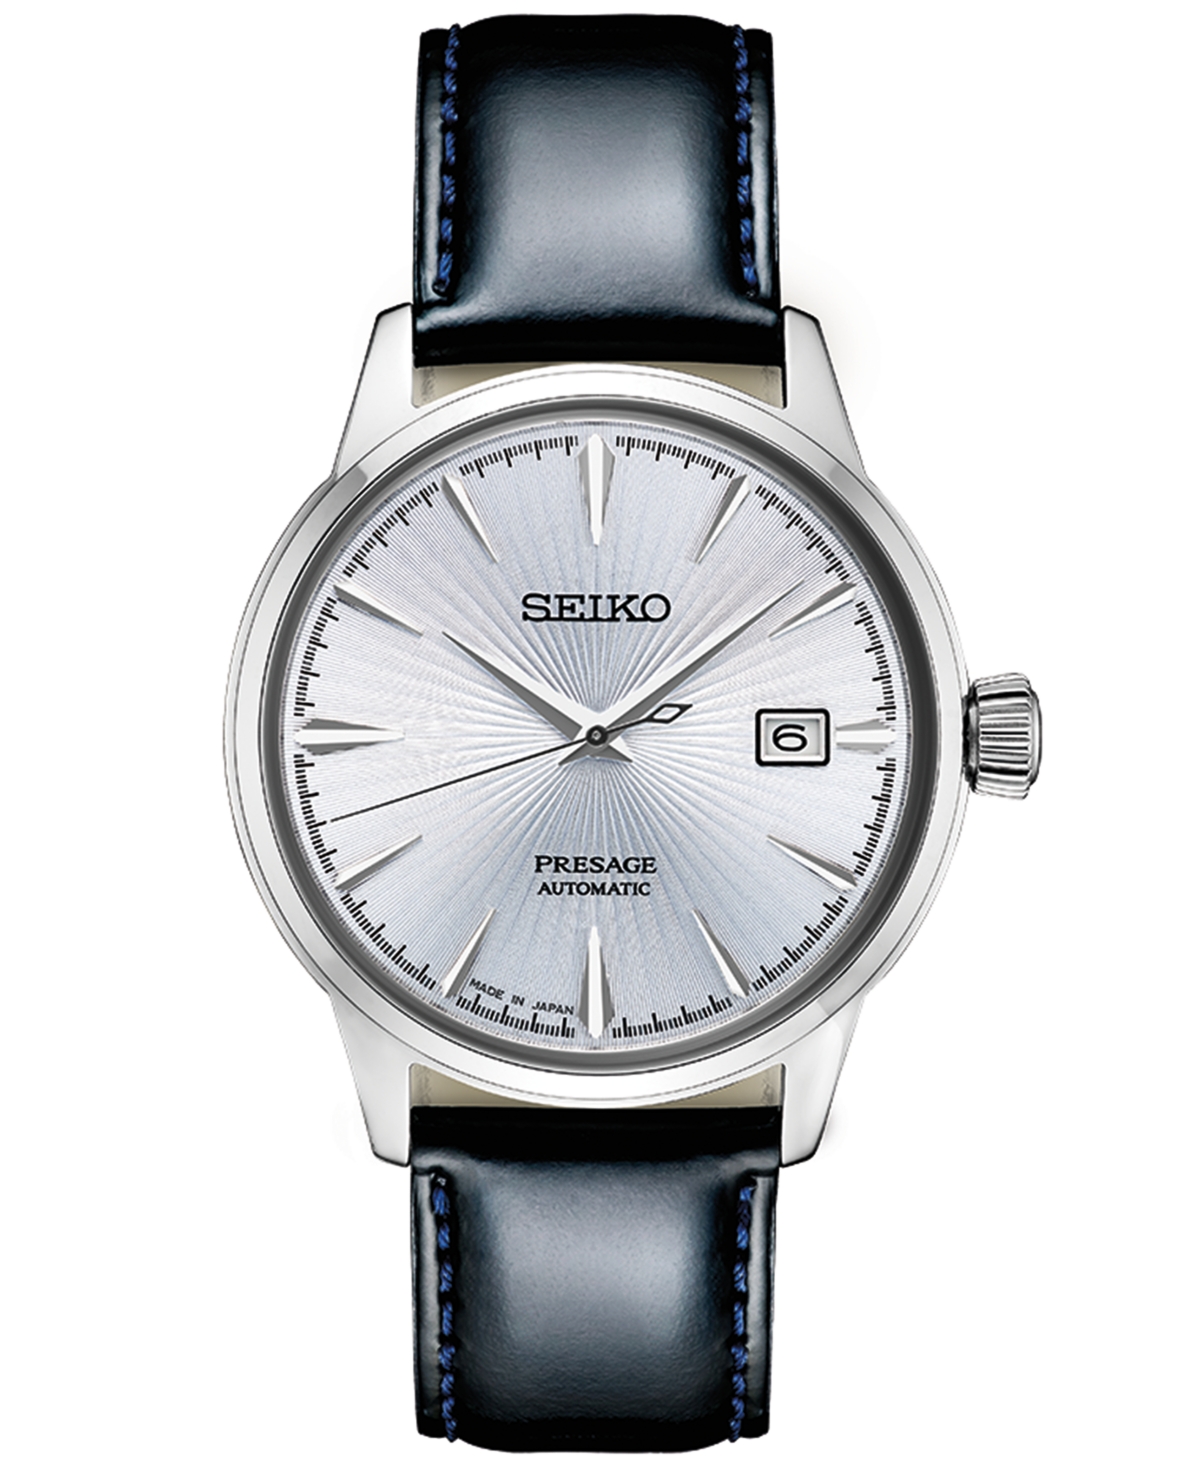 Seiko Men's Automatic Presage Black Leather Strap Watch  & Reviews -  All Watches - Jewelry & Watches - Macy's